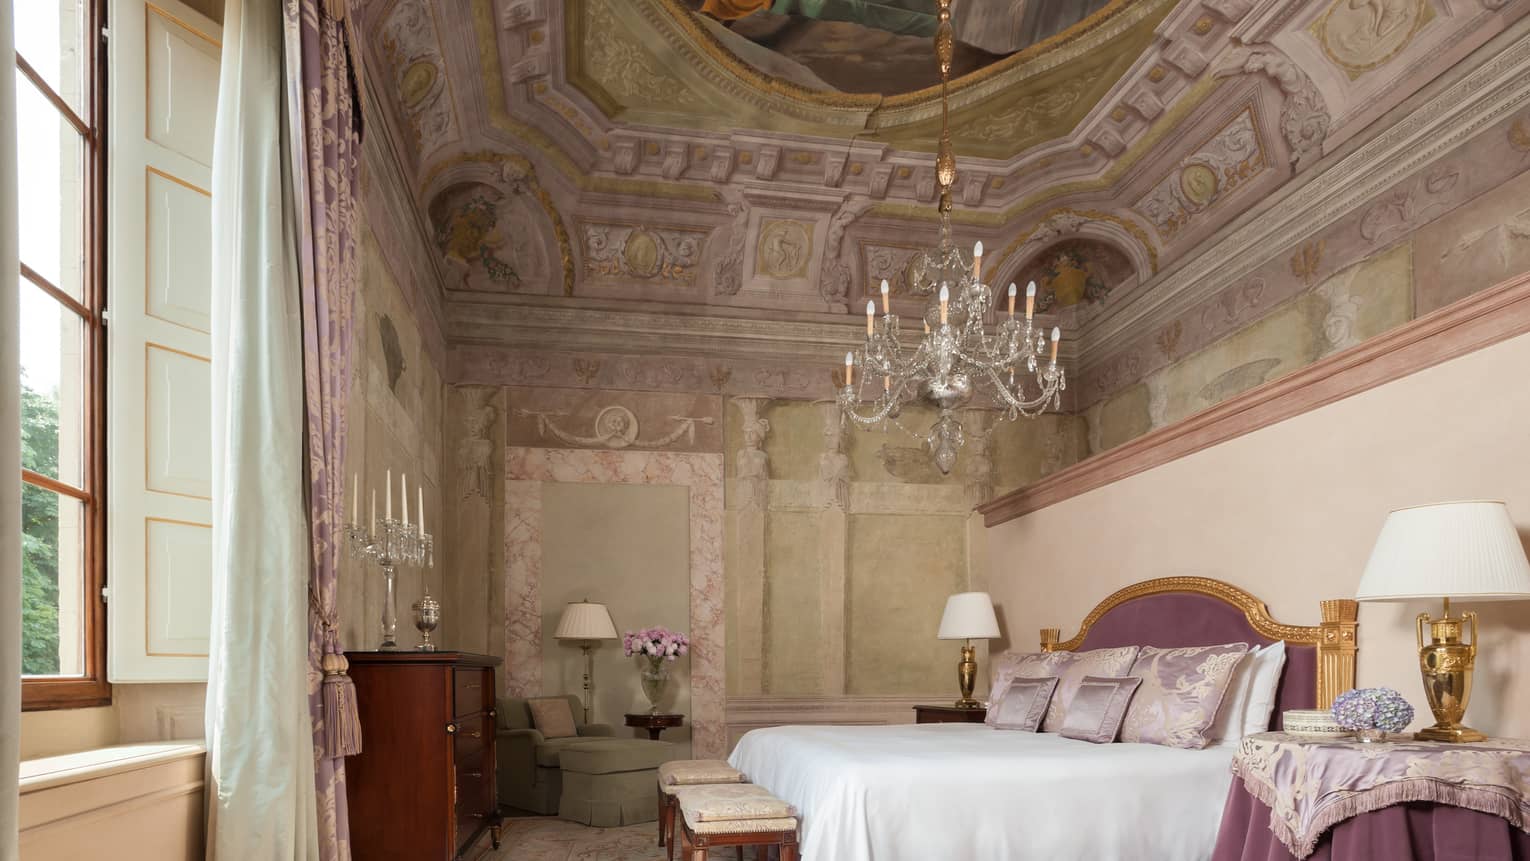 Frescoed Executive Suite bed with purple velvet headboard, nightstand with cloth under chandelier, vaulted ceiling